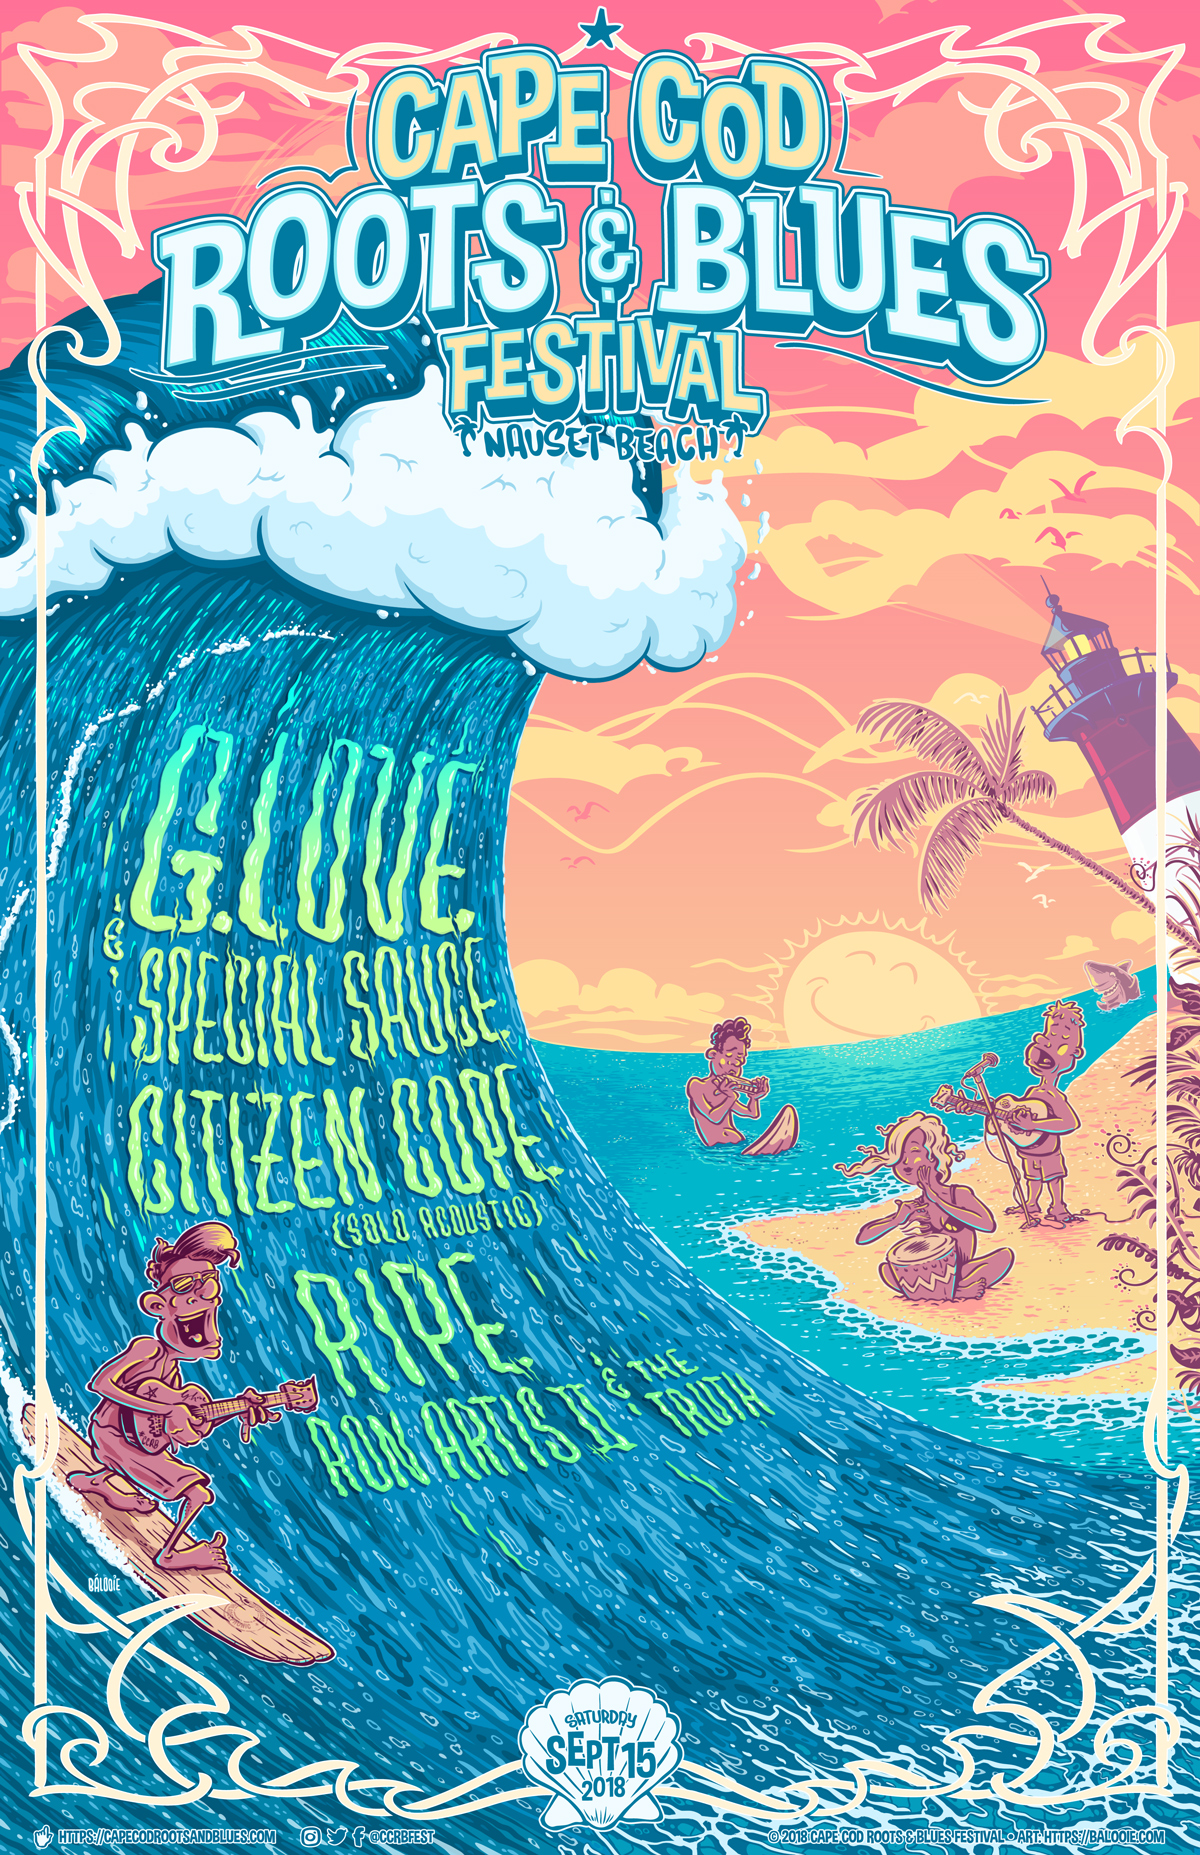 Cape Cod Roots & Blues Festival 2018 Poster Art for G. Love & Special Sauce